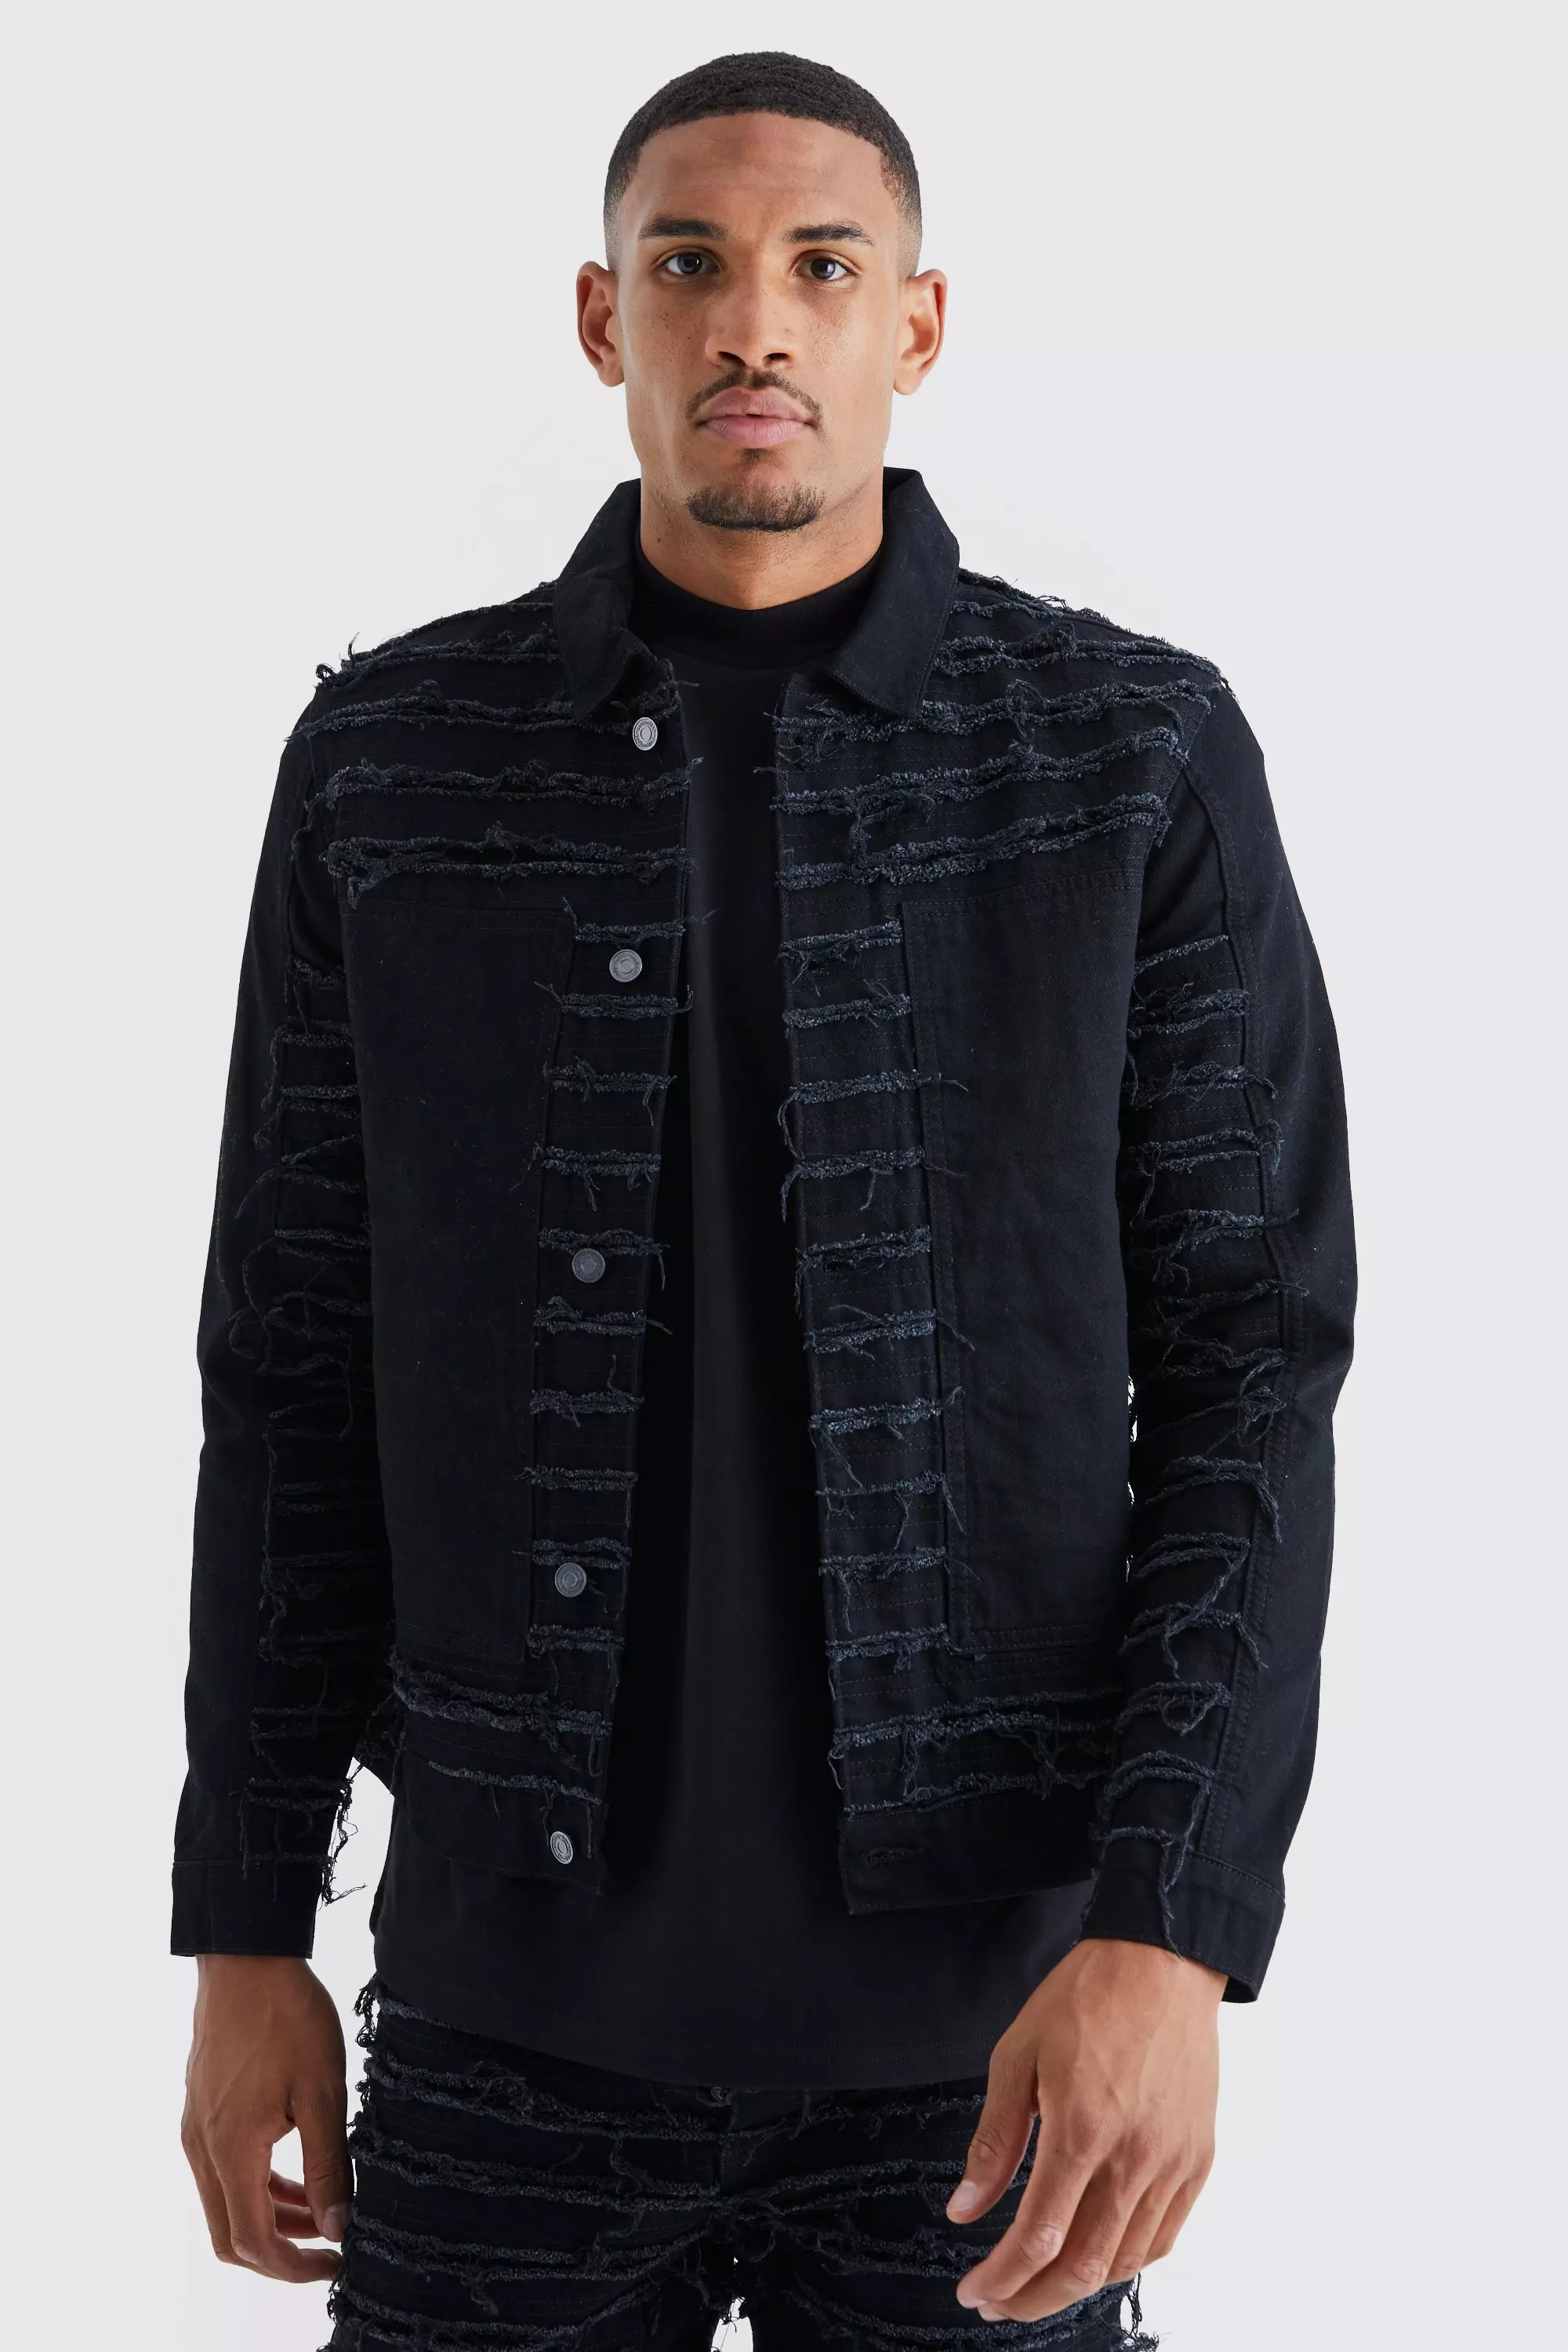 Black Tall All Over Distressed Jean Jackets